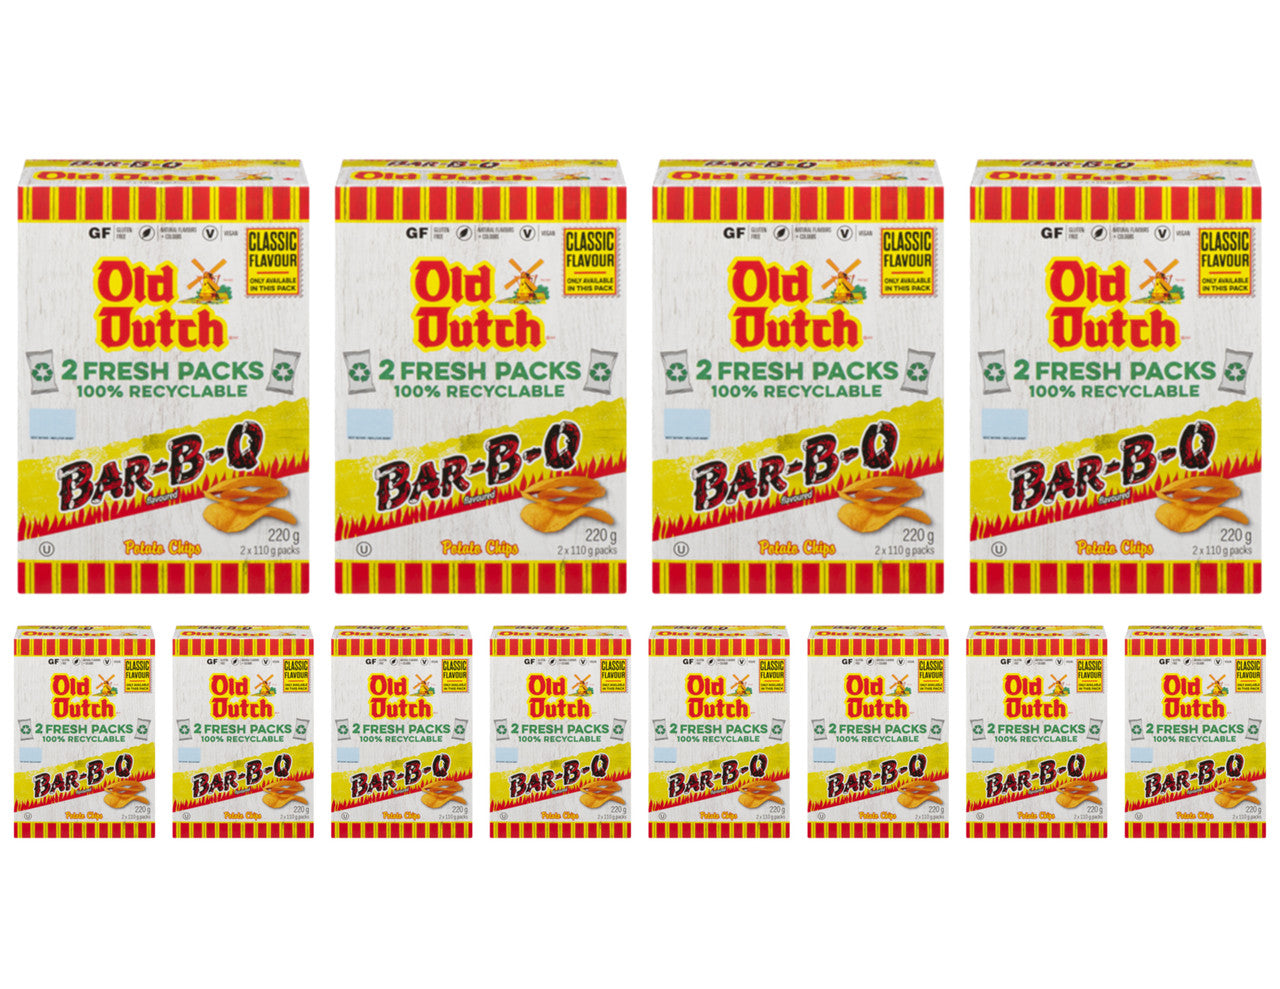 Old Dutch BBQ Barbeque Potato Chips, 220g/7.8 oz., Box (12pk) {Imported from Canada}